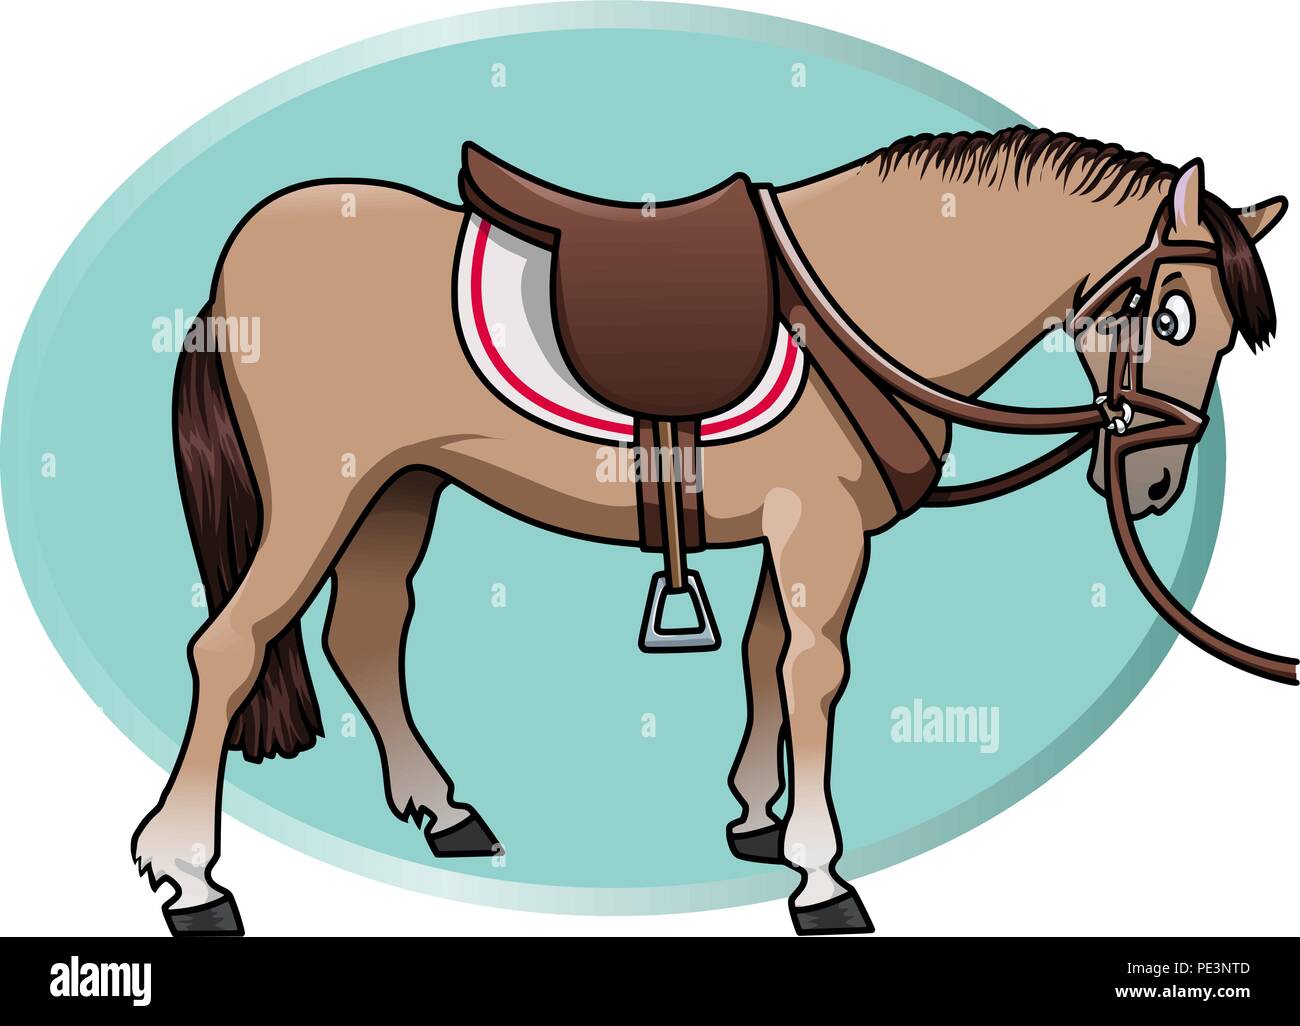 Cartoon-style illustration of a cute brown horse with saddle and reins. An aquamarine oval shape on the background Stock Vector